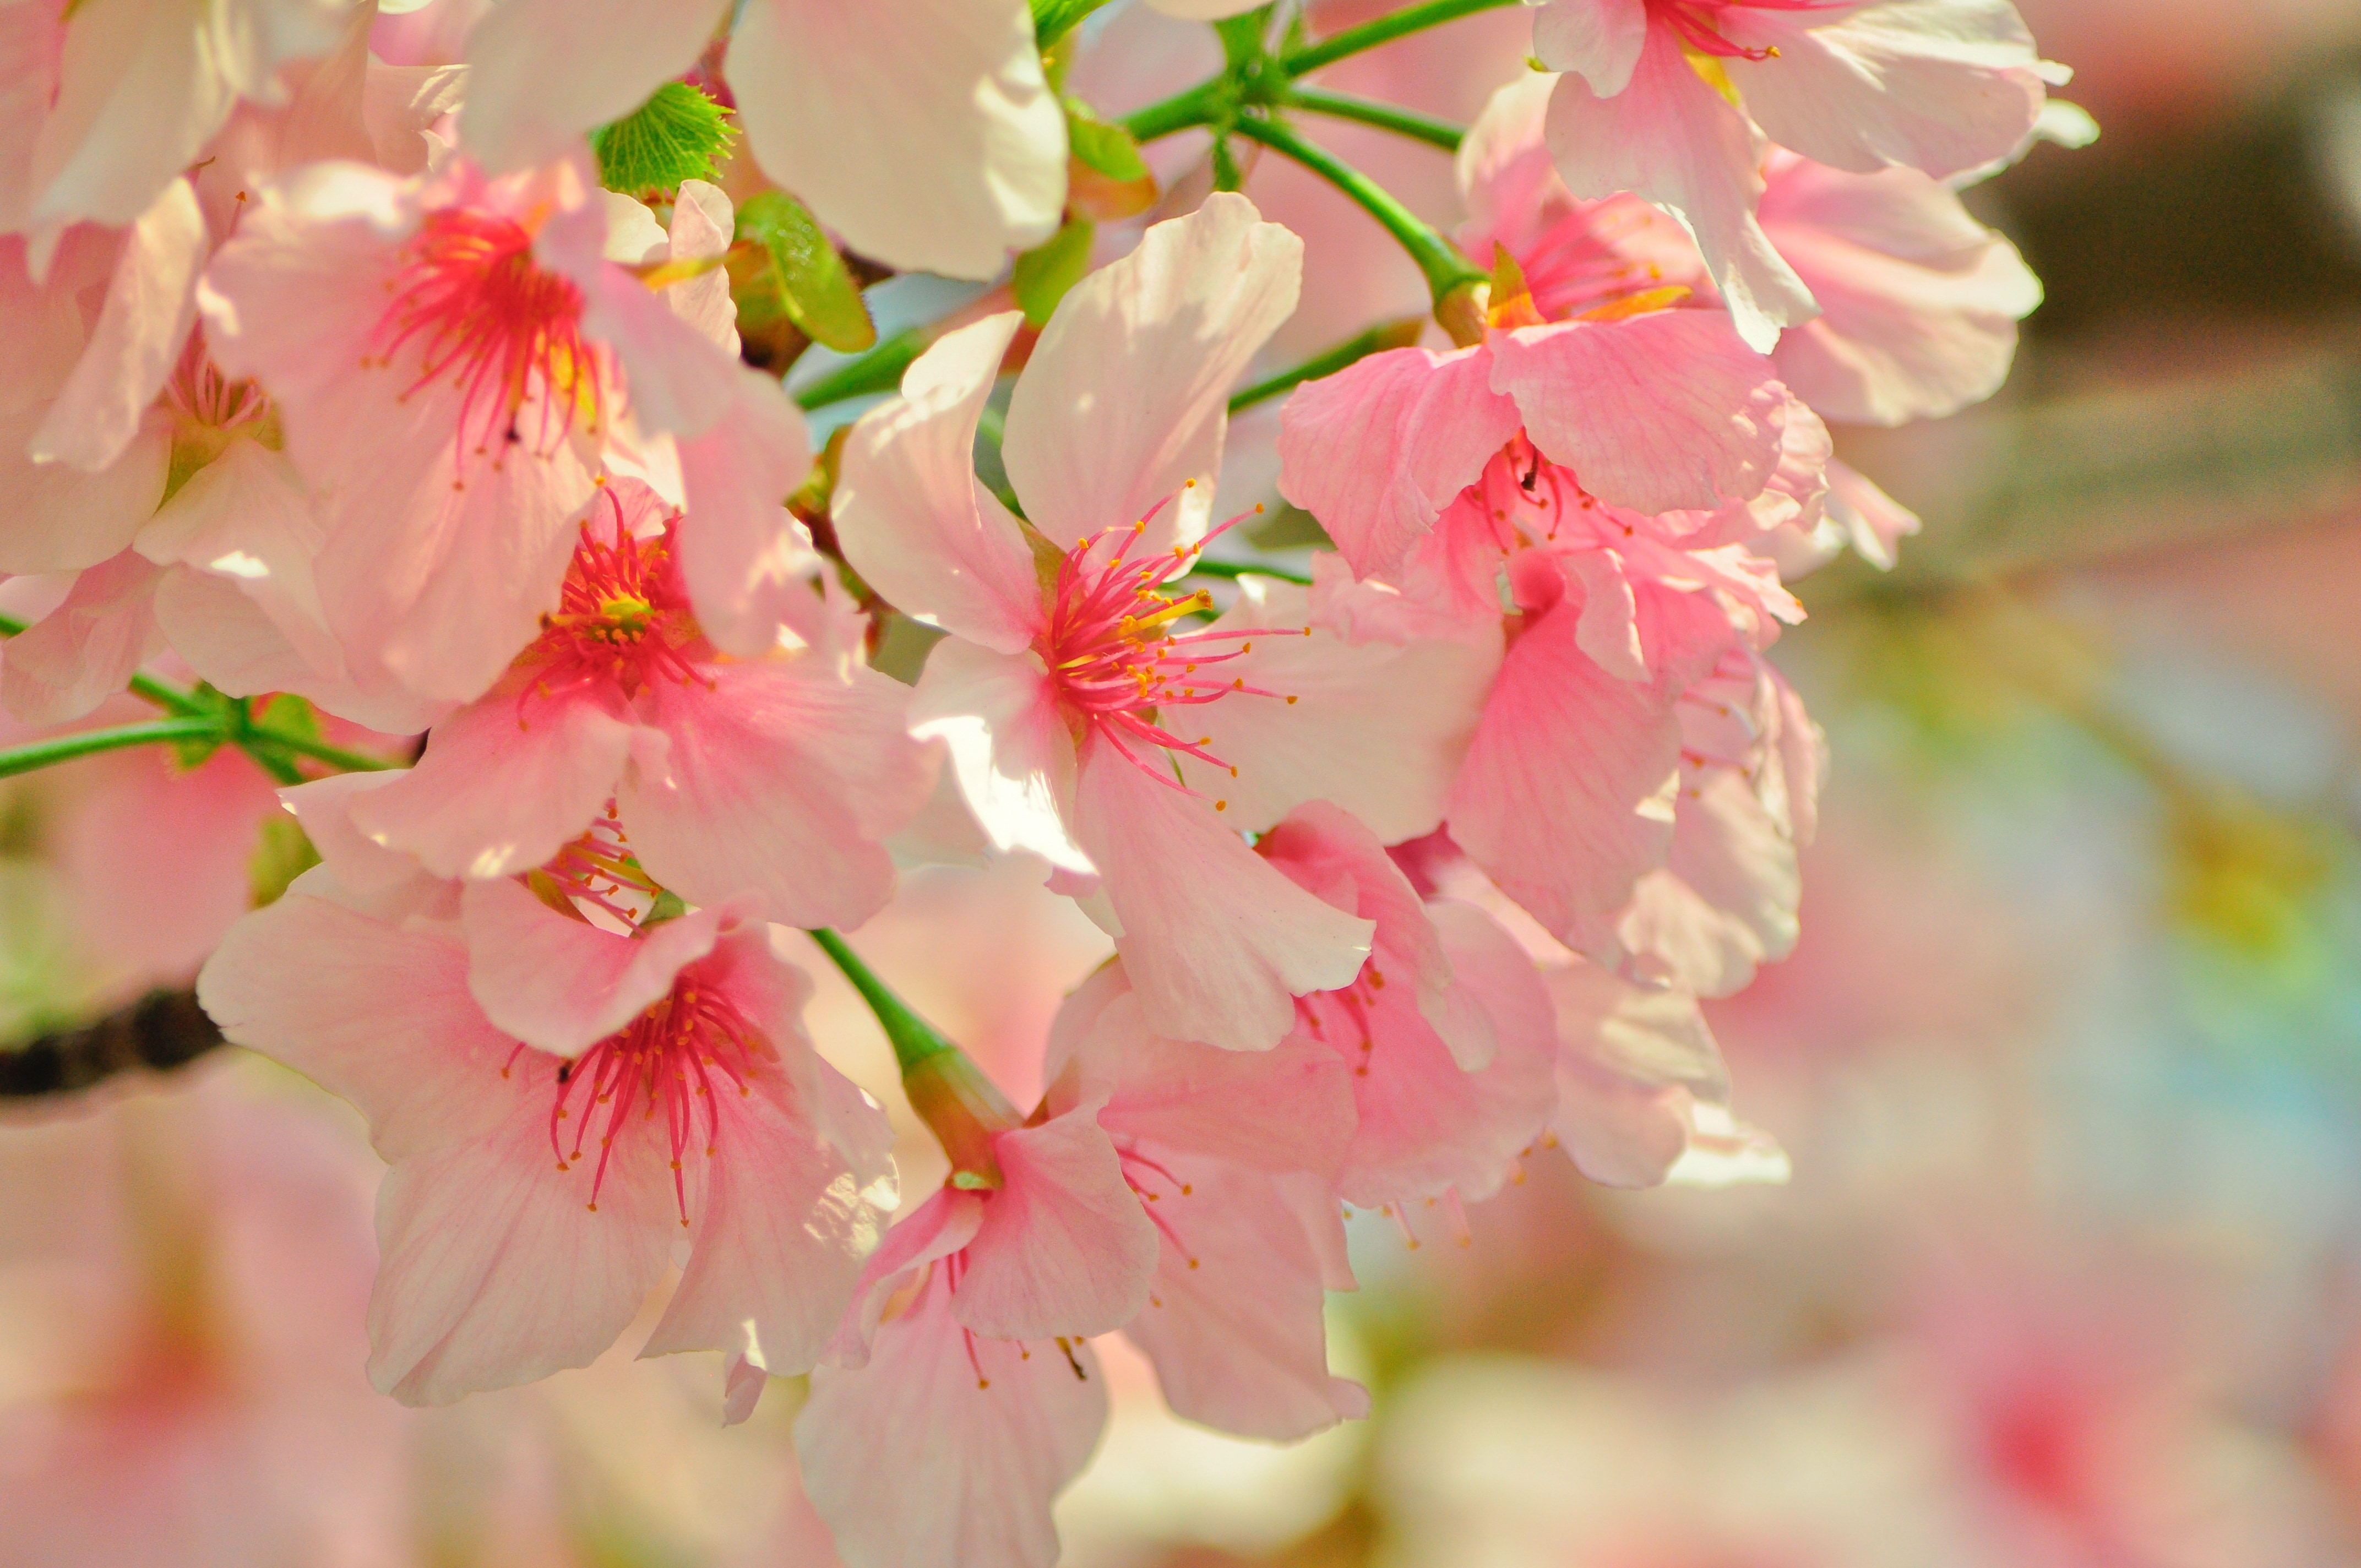 Plant, Flower, Spring, Cherry Blossoms, flower, pink color